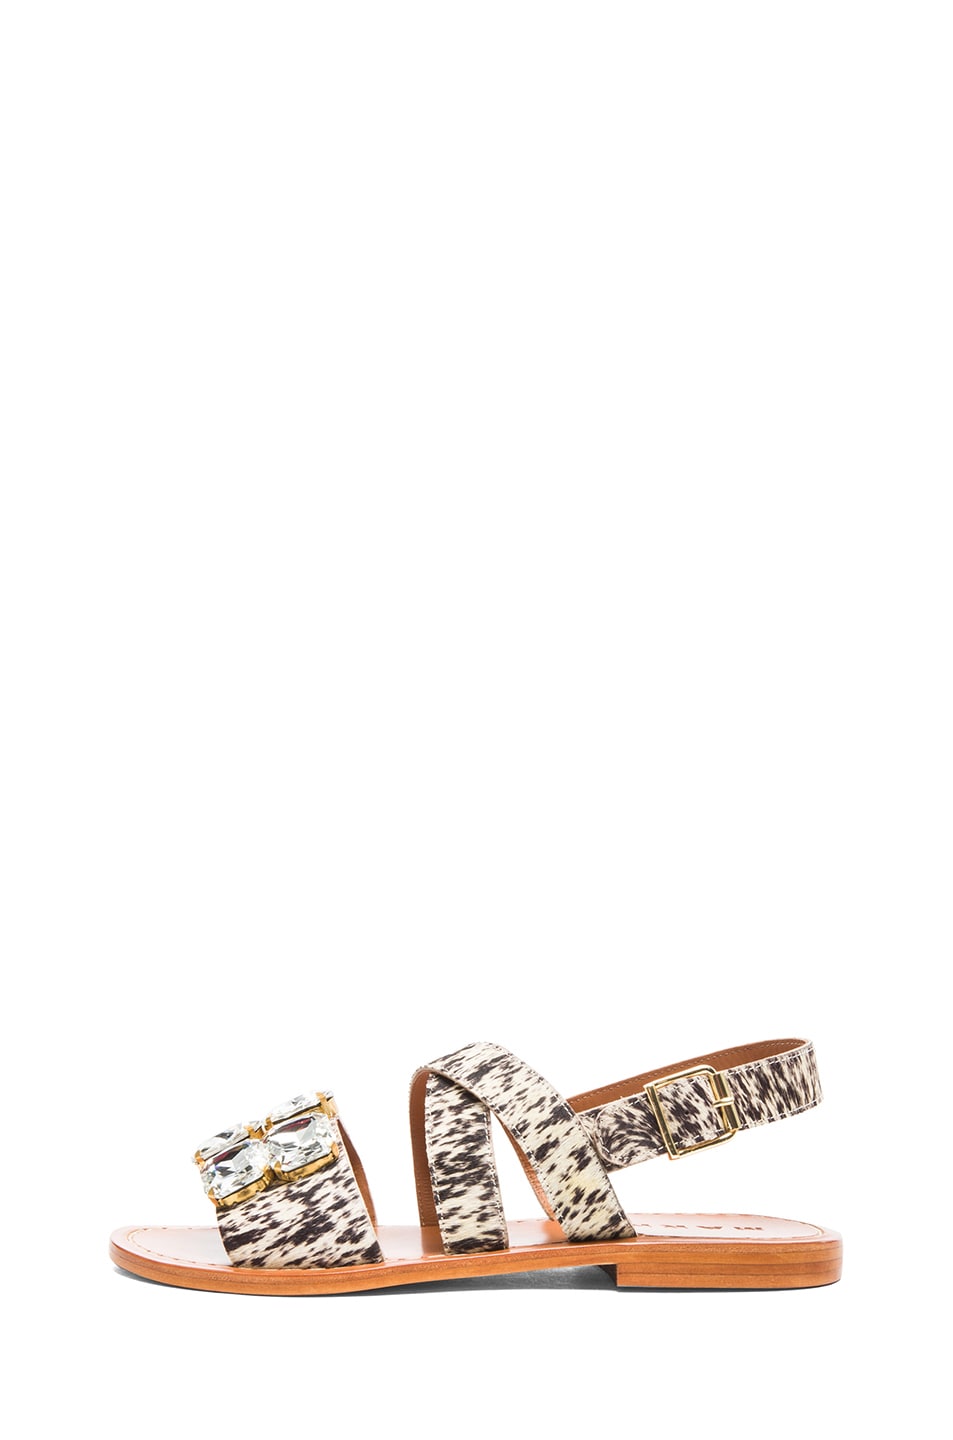 Image 1 of Marni Calf Hair Embellished Sandals with Large Stones in Leopard